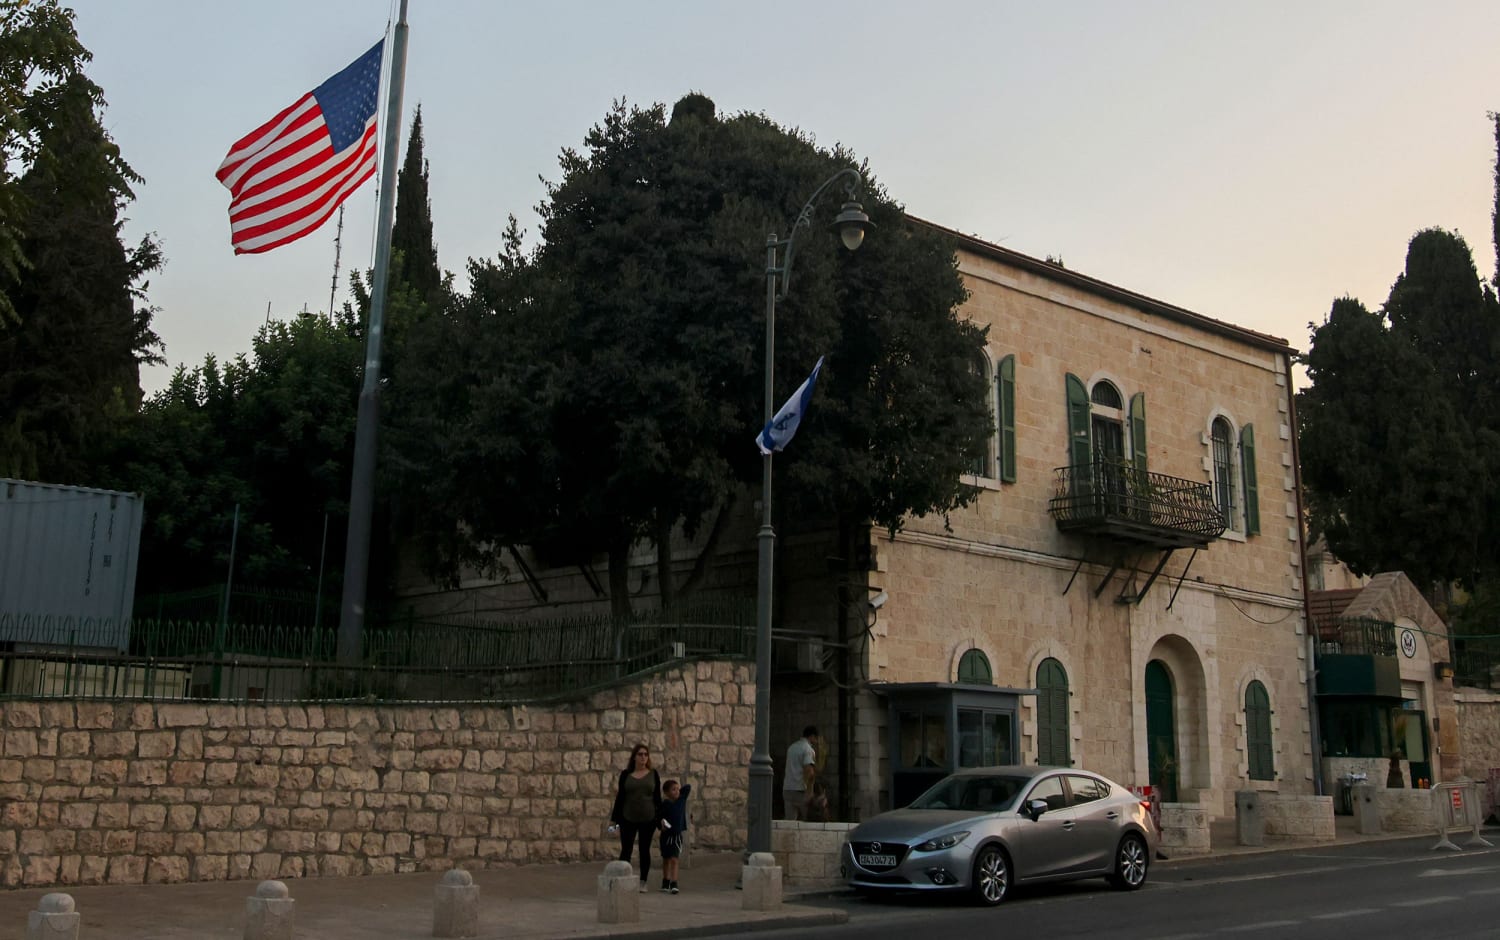 Biden promised to reopen the Jerusalem consulate Trump closed. But can he?